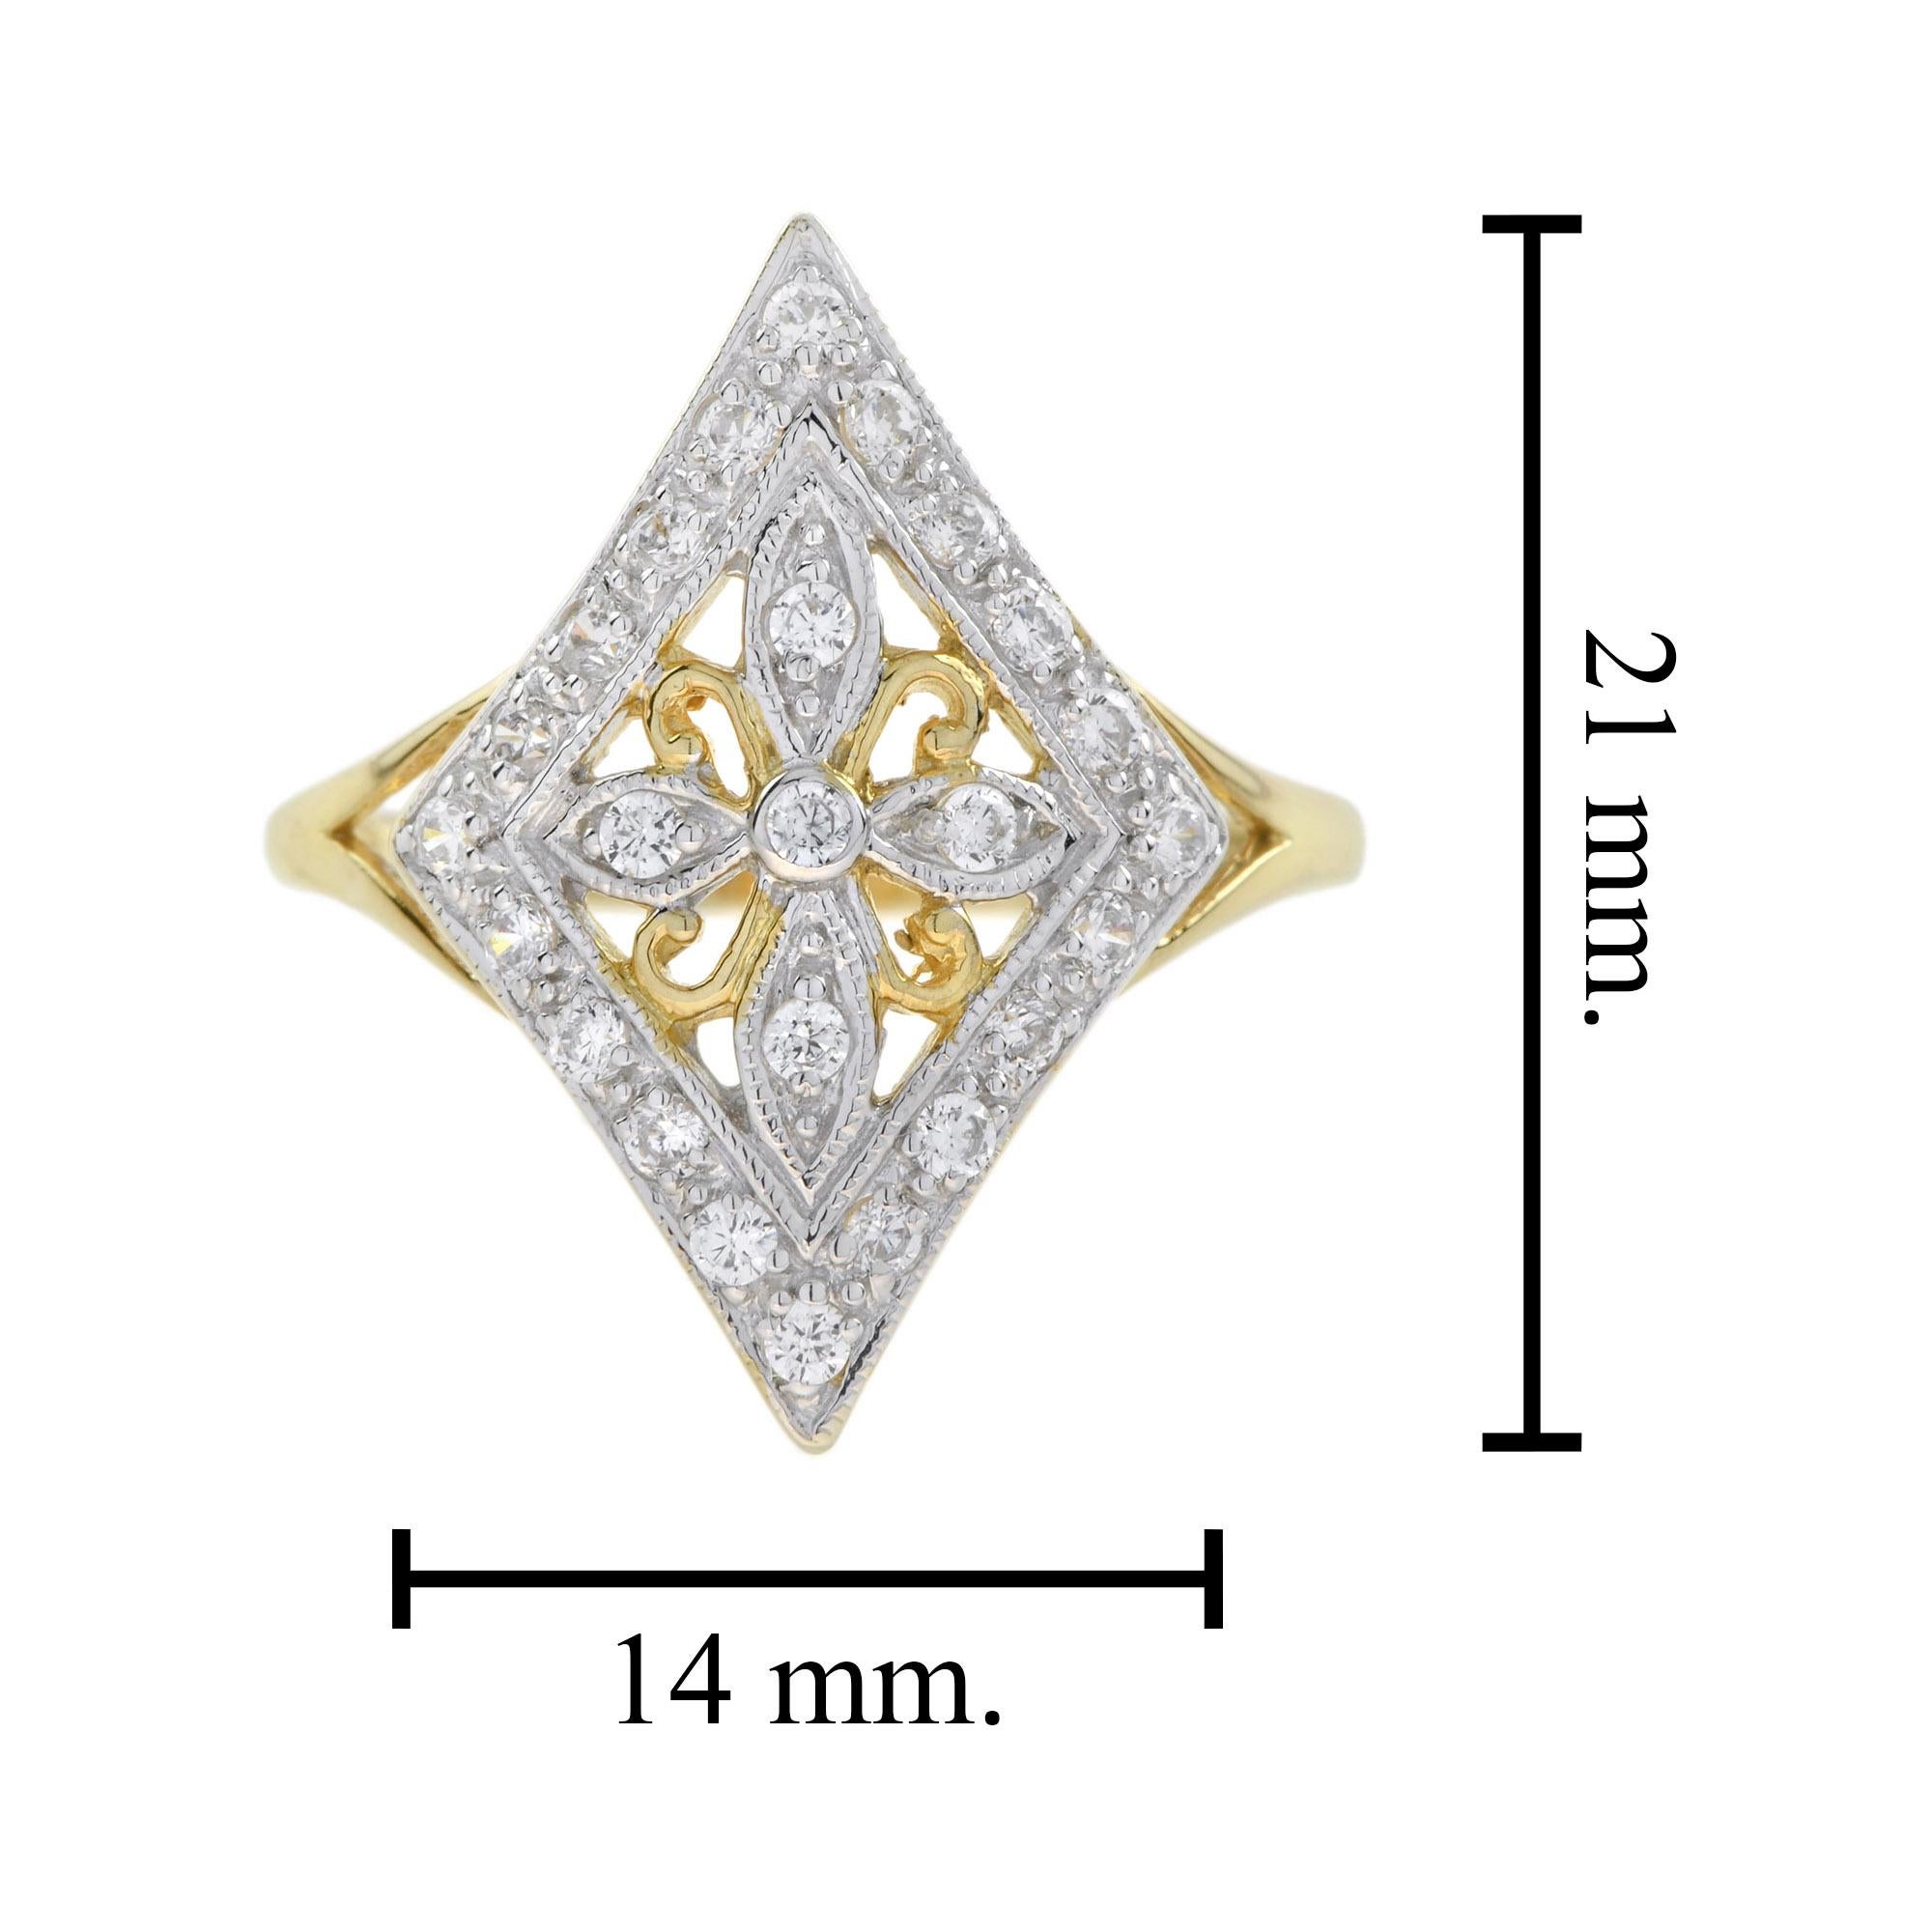 For Sale:  Vintage Style Diamond Floral Filigree Ring in 14K Yellow Gold 6